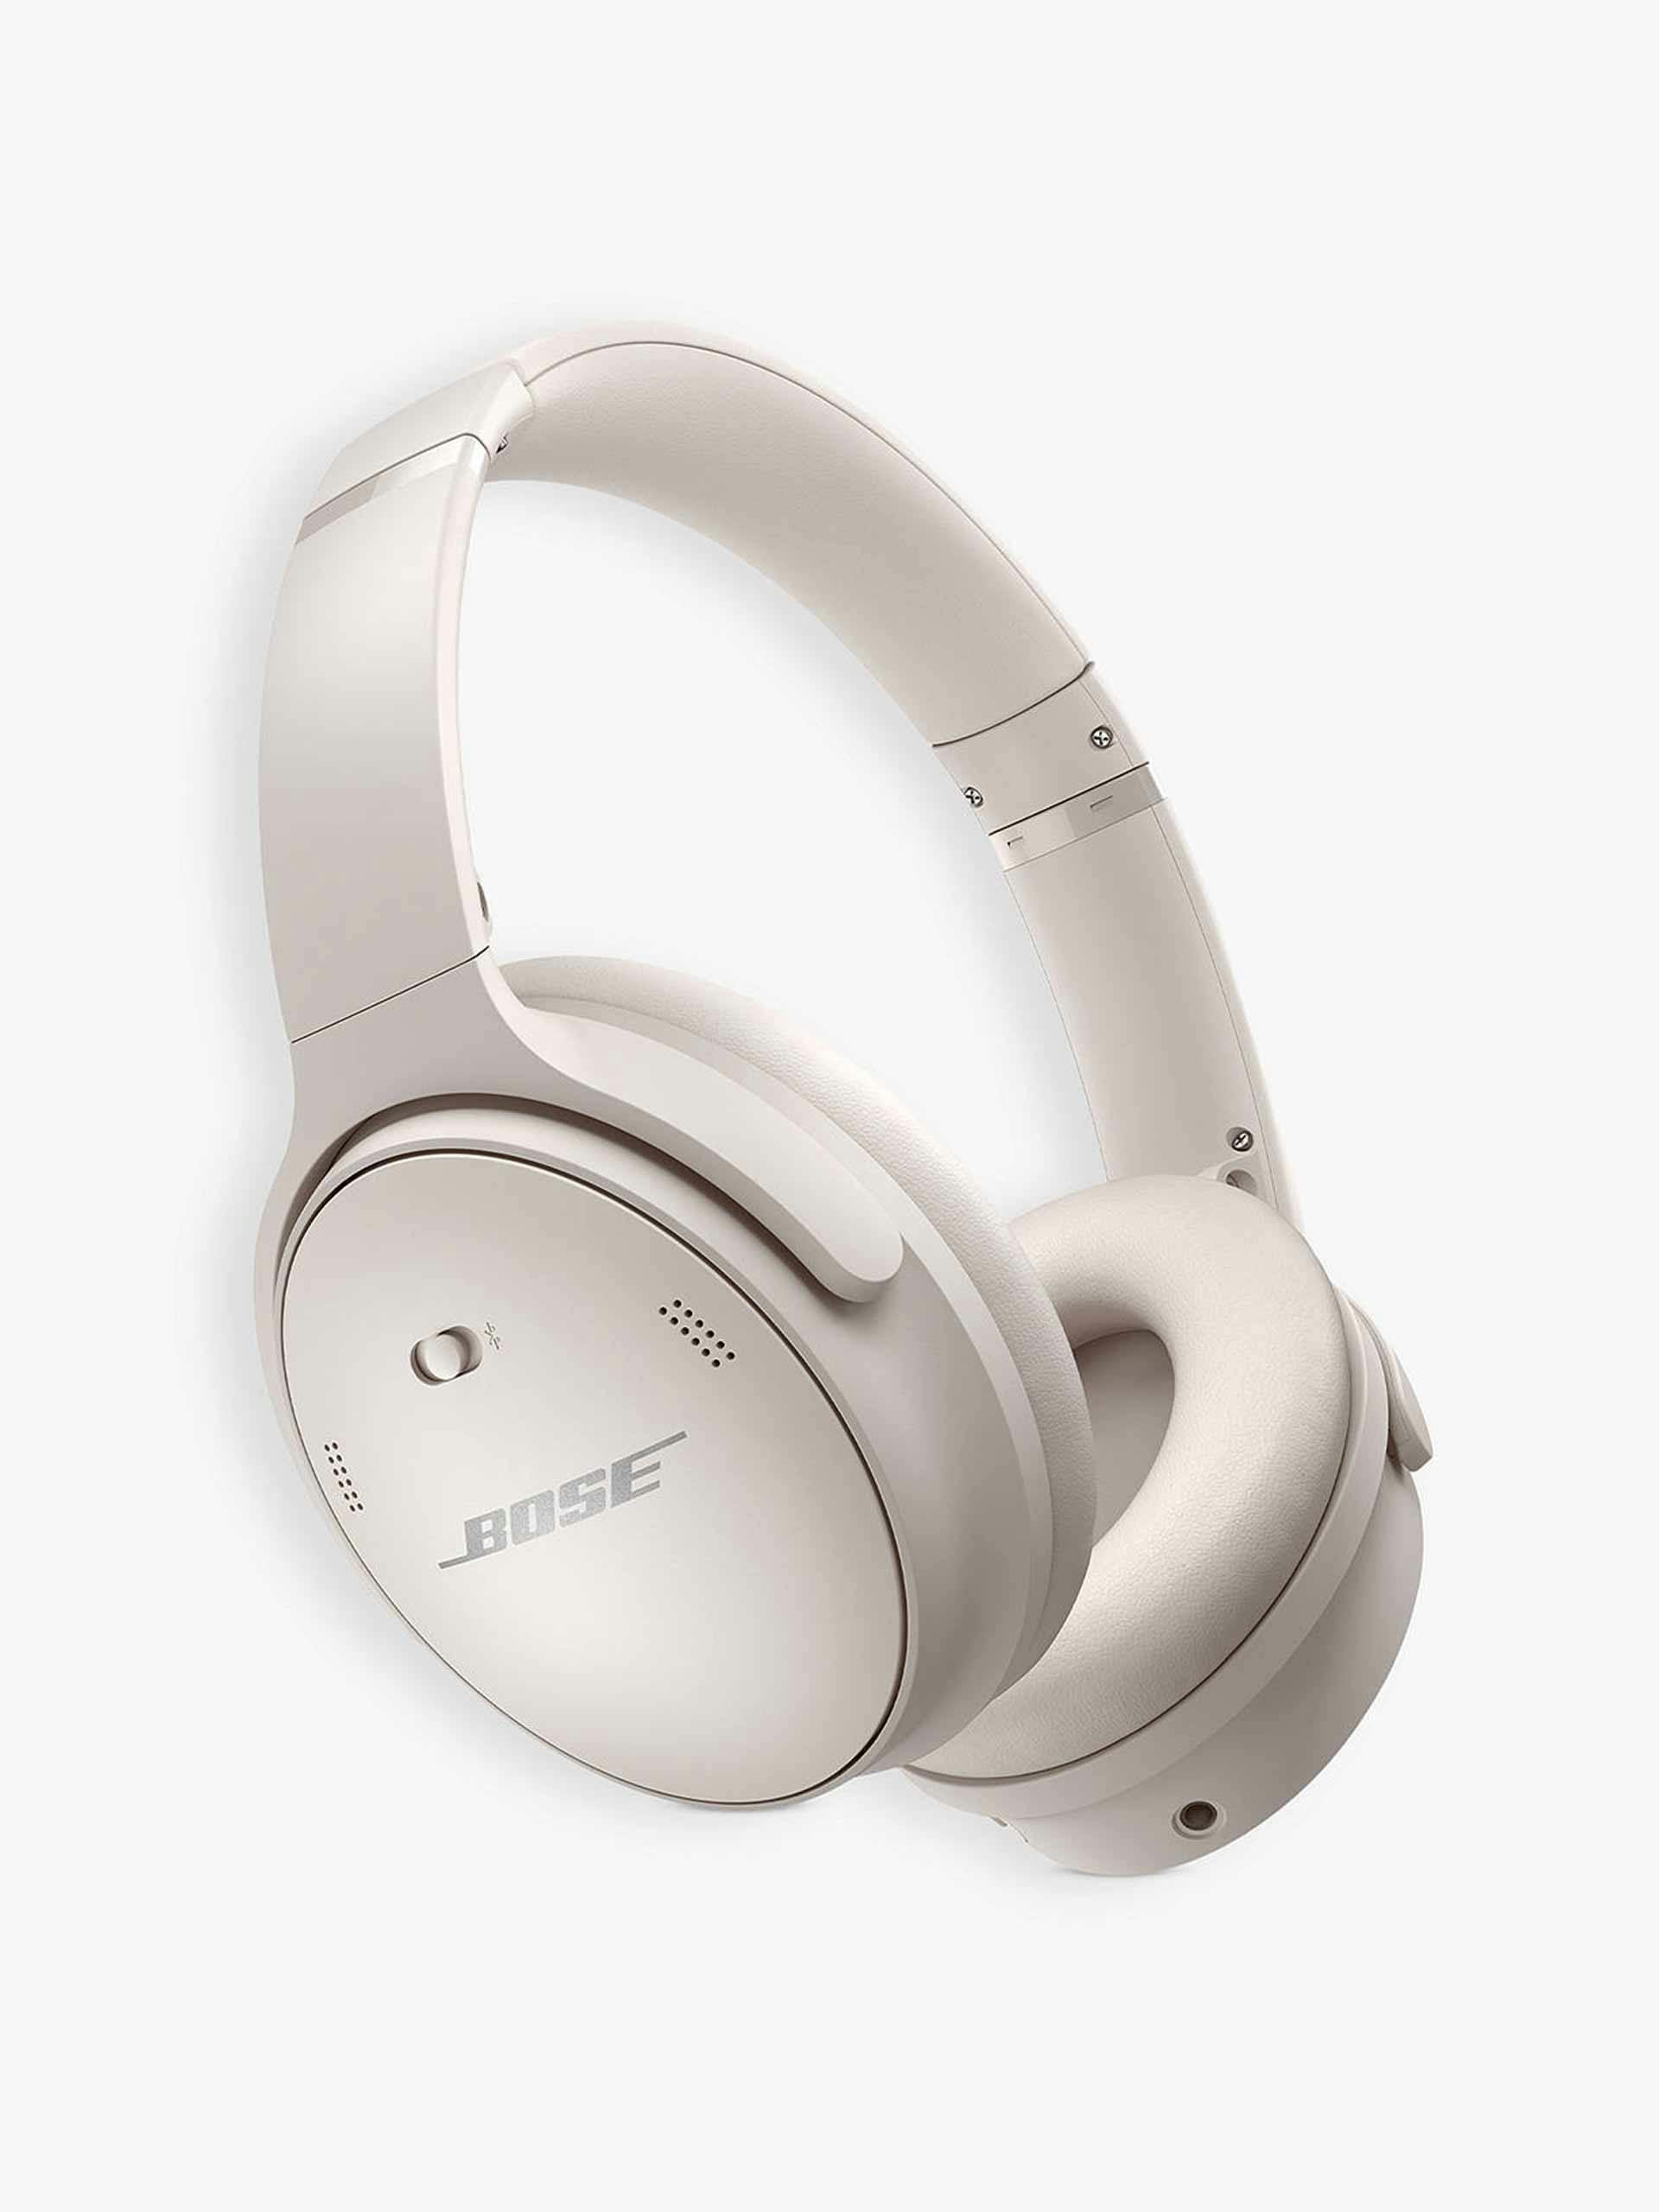 Noise cancelling over-ear wireless headphones